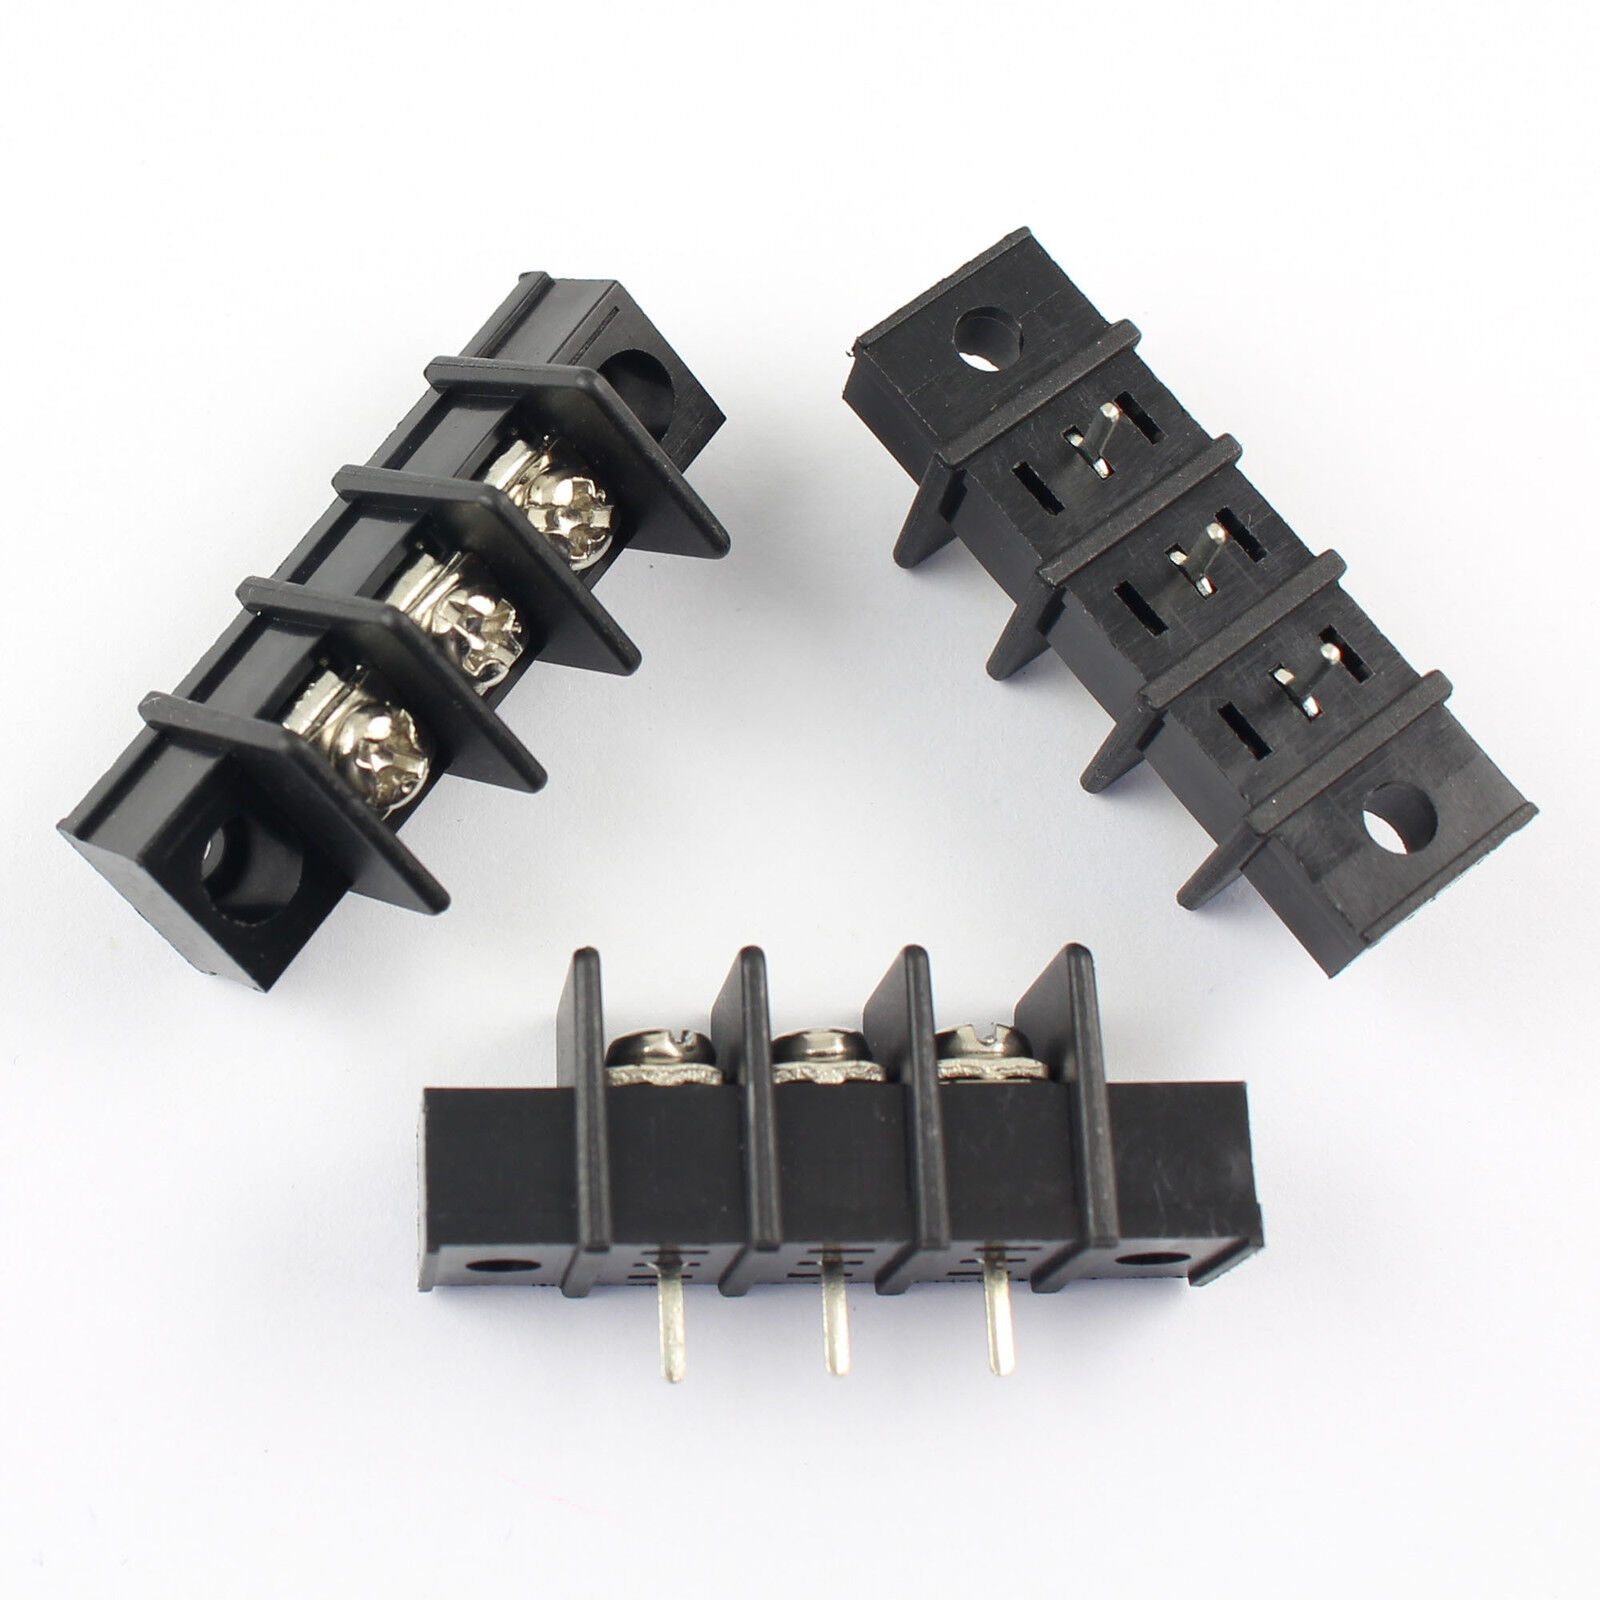 50Pcs Black 7.62mm Japan Maker New Pitch 3 Block Connector Challenge the lowest price Barrier Pin Terminal